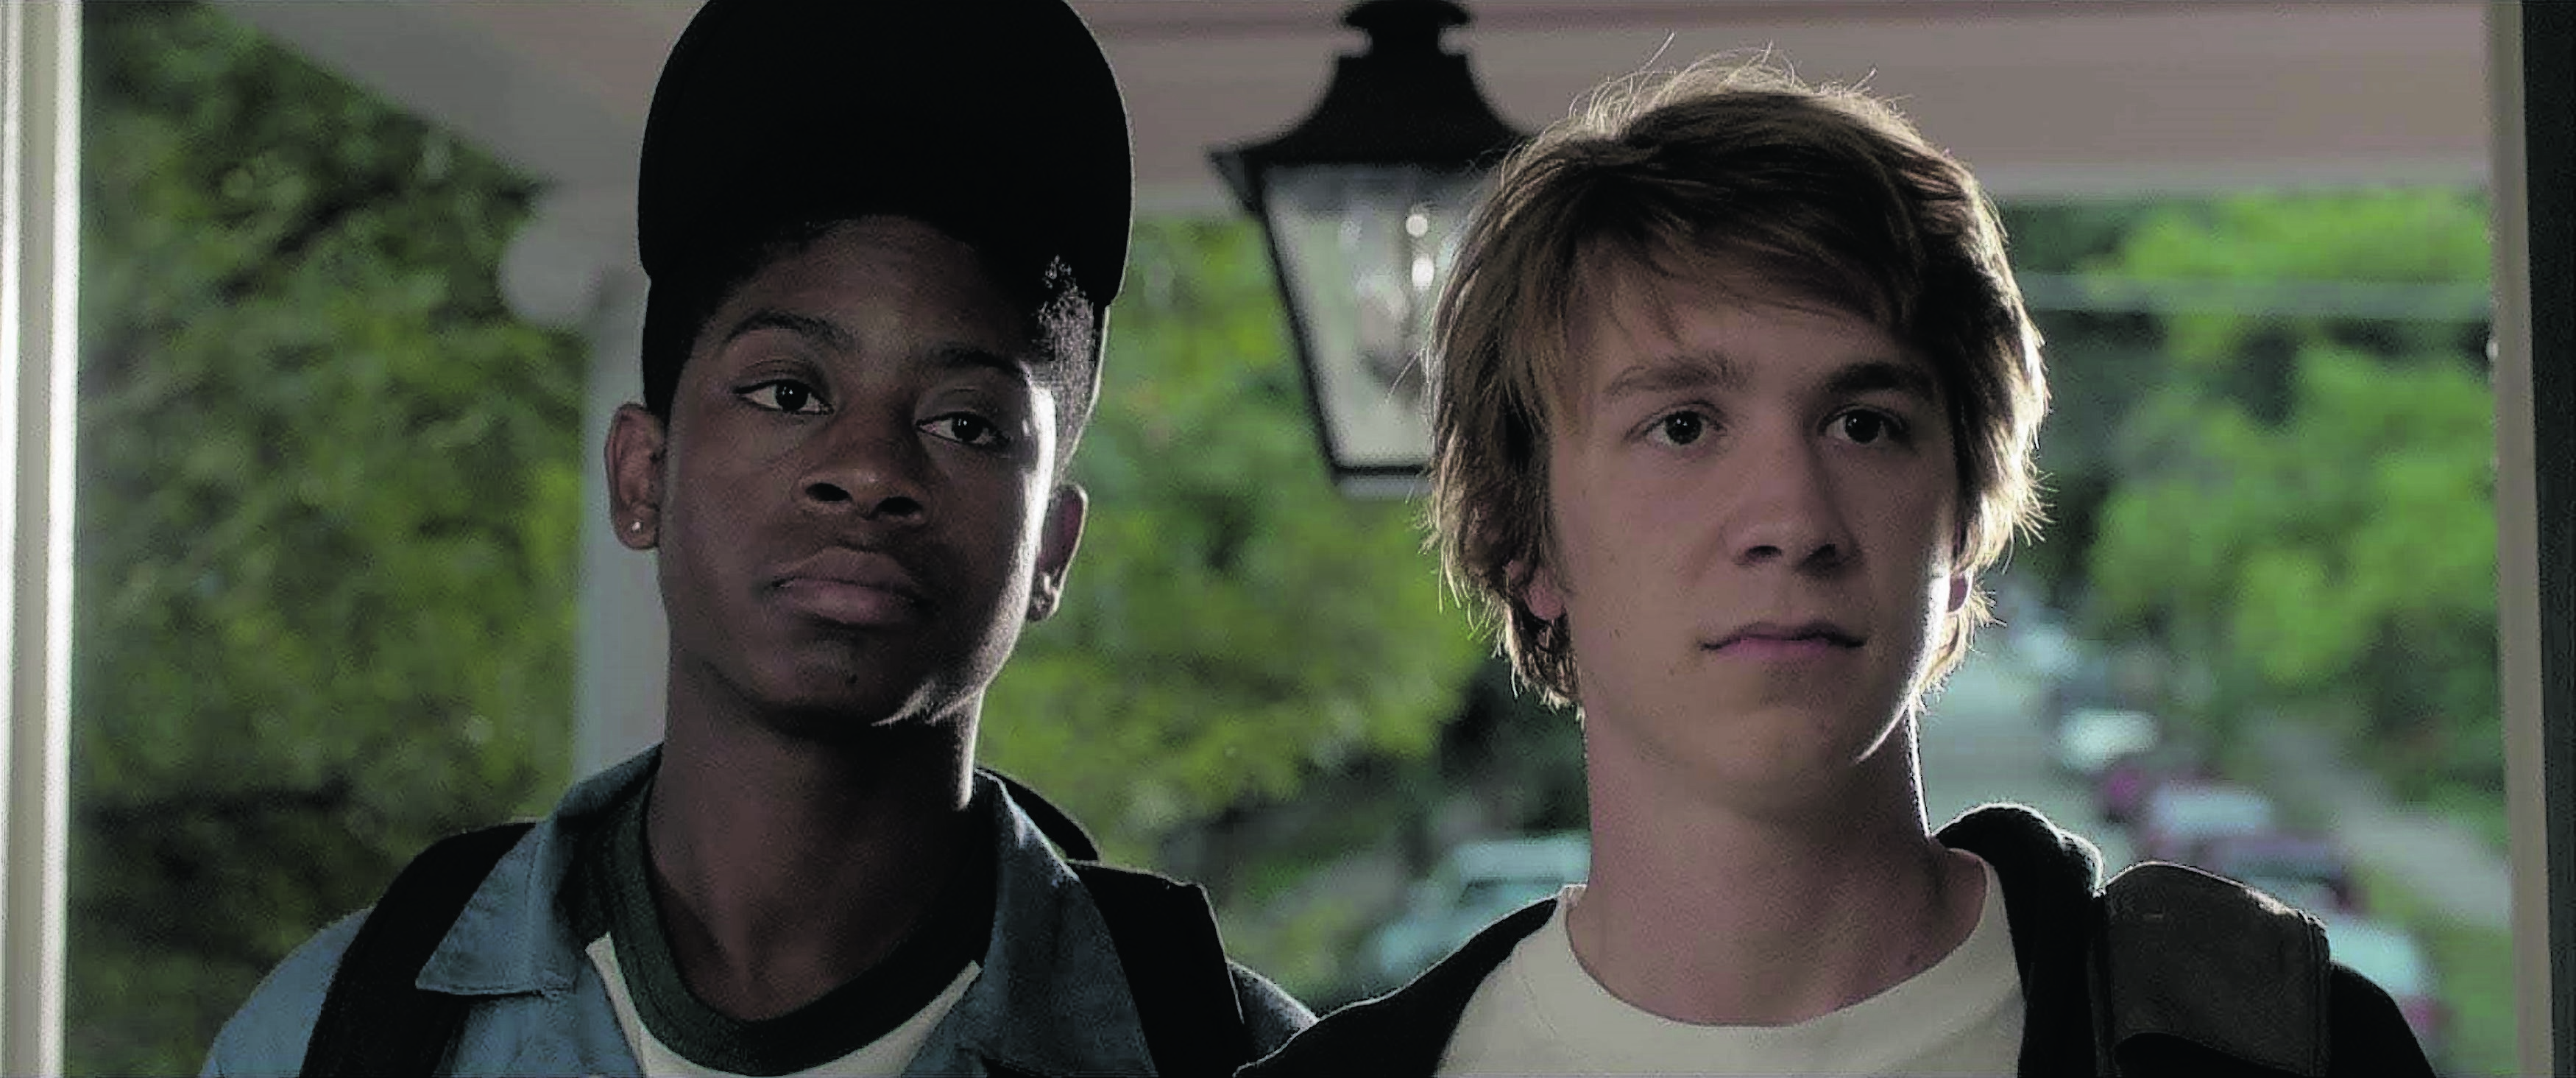 R.J. Cyler as Earl, left, and Thomas Mann as Greg in Me And Earl And The Dying Girl